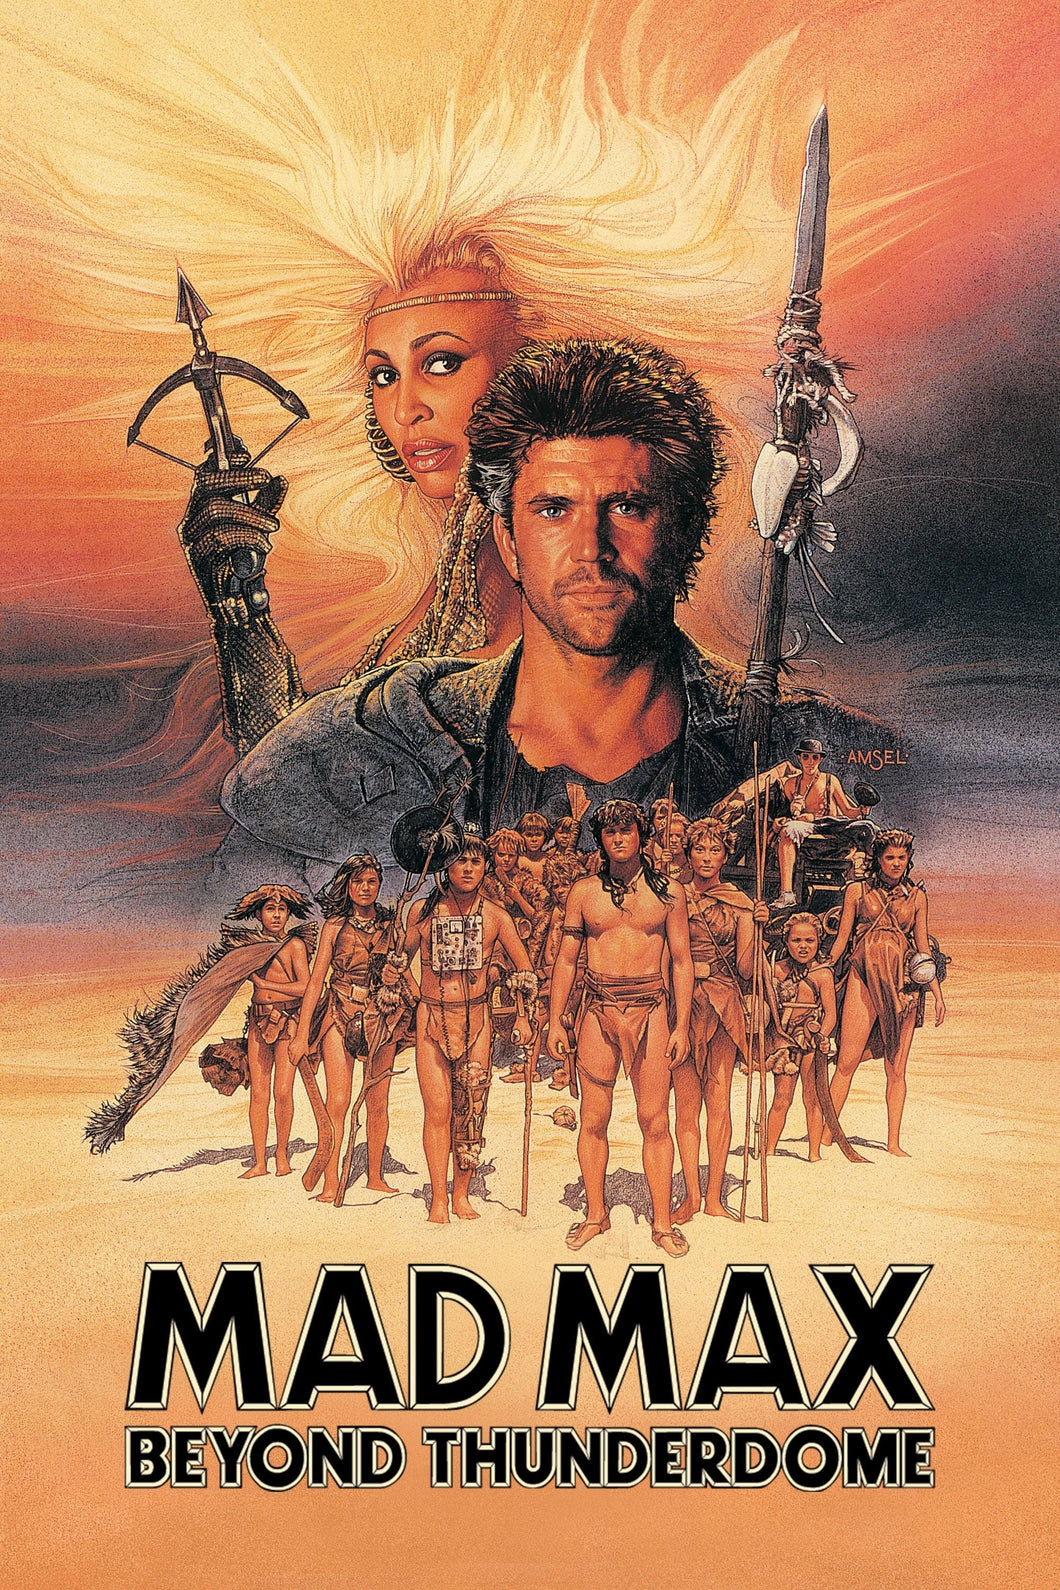 Mad Max Beyond Thunderdome Movie Poster Framed or Unframed Glossy Poster Free UK Shipping!!!